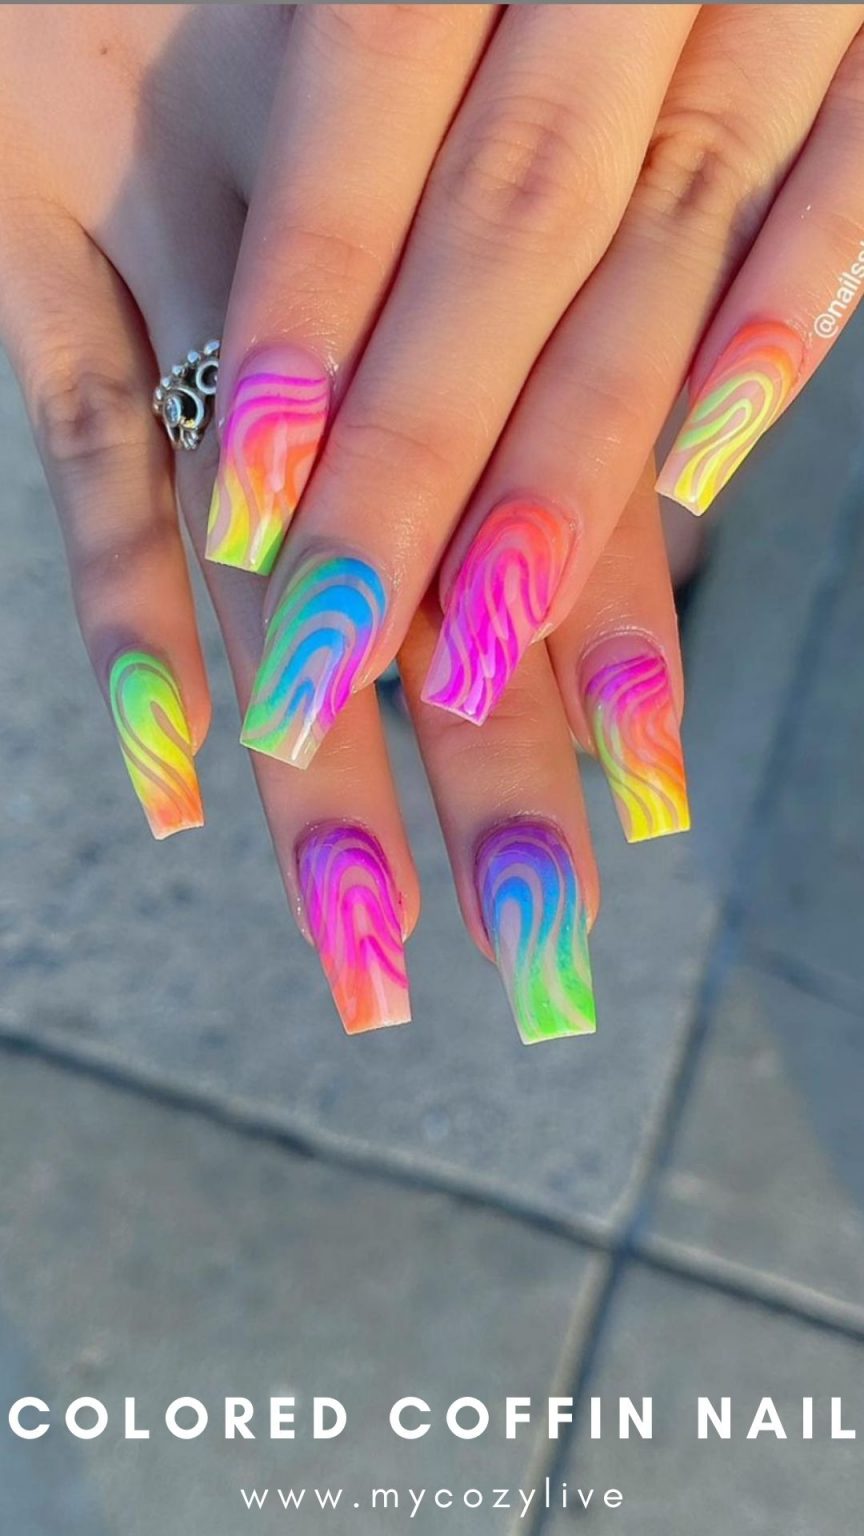 65+ Colored acrylic coffin nails for Summer and Fall 2021! - Page 21 of ...